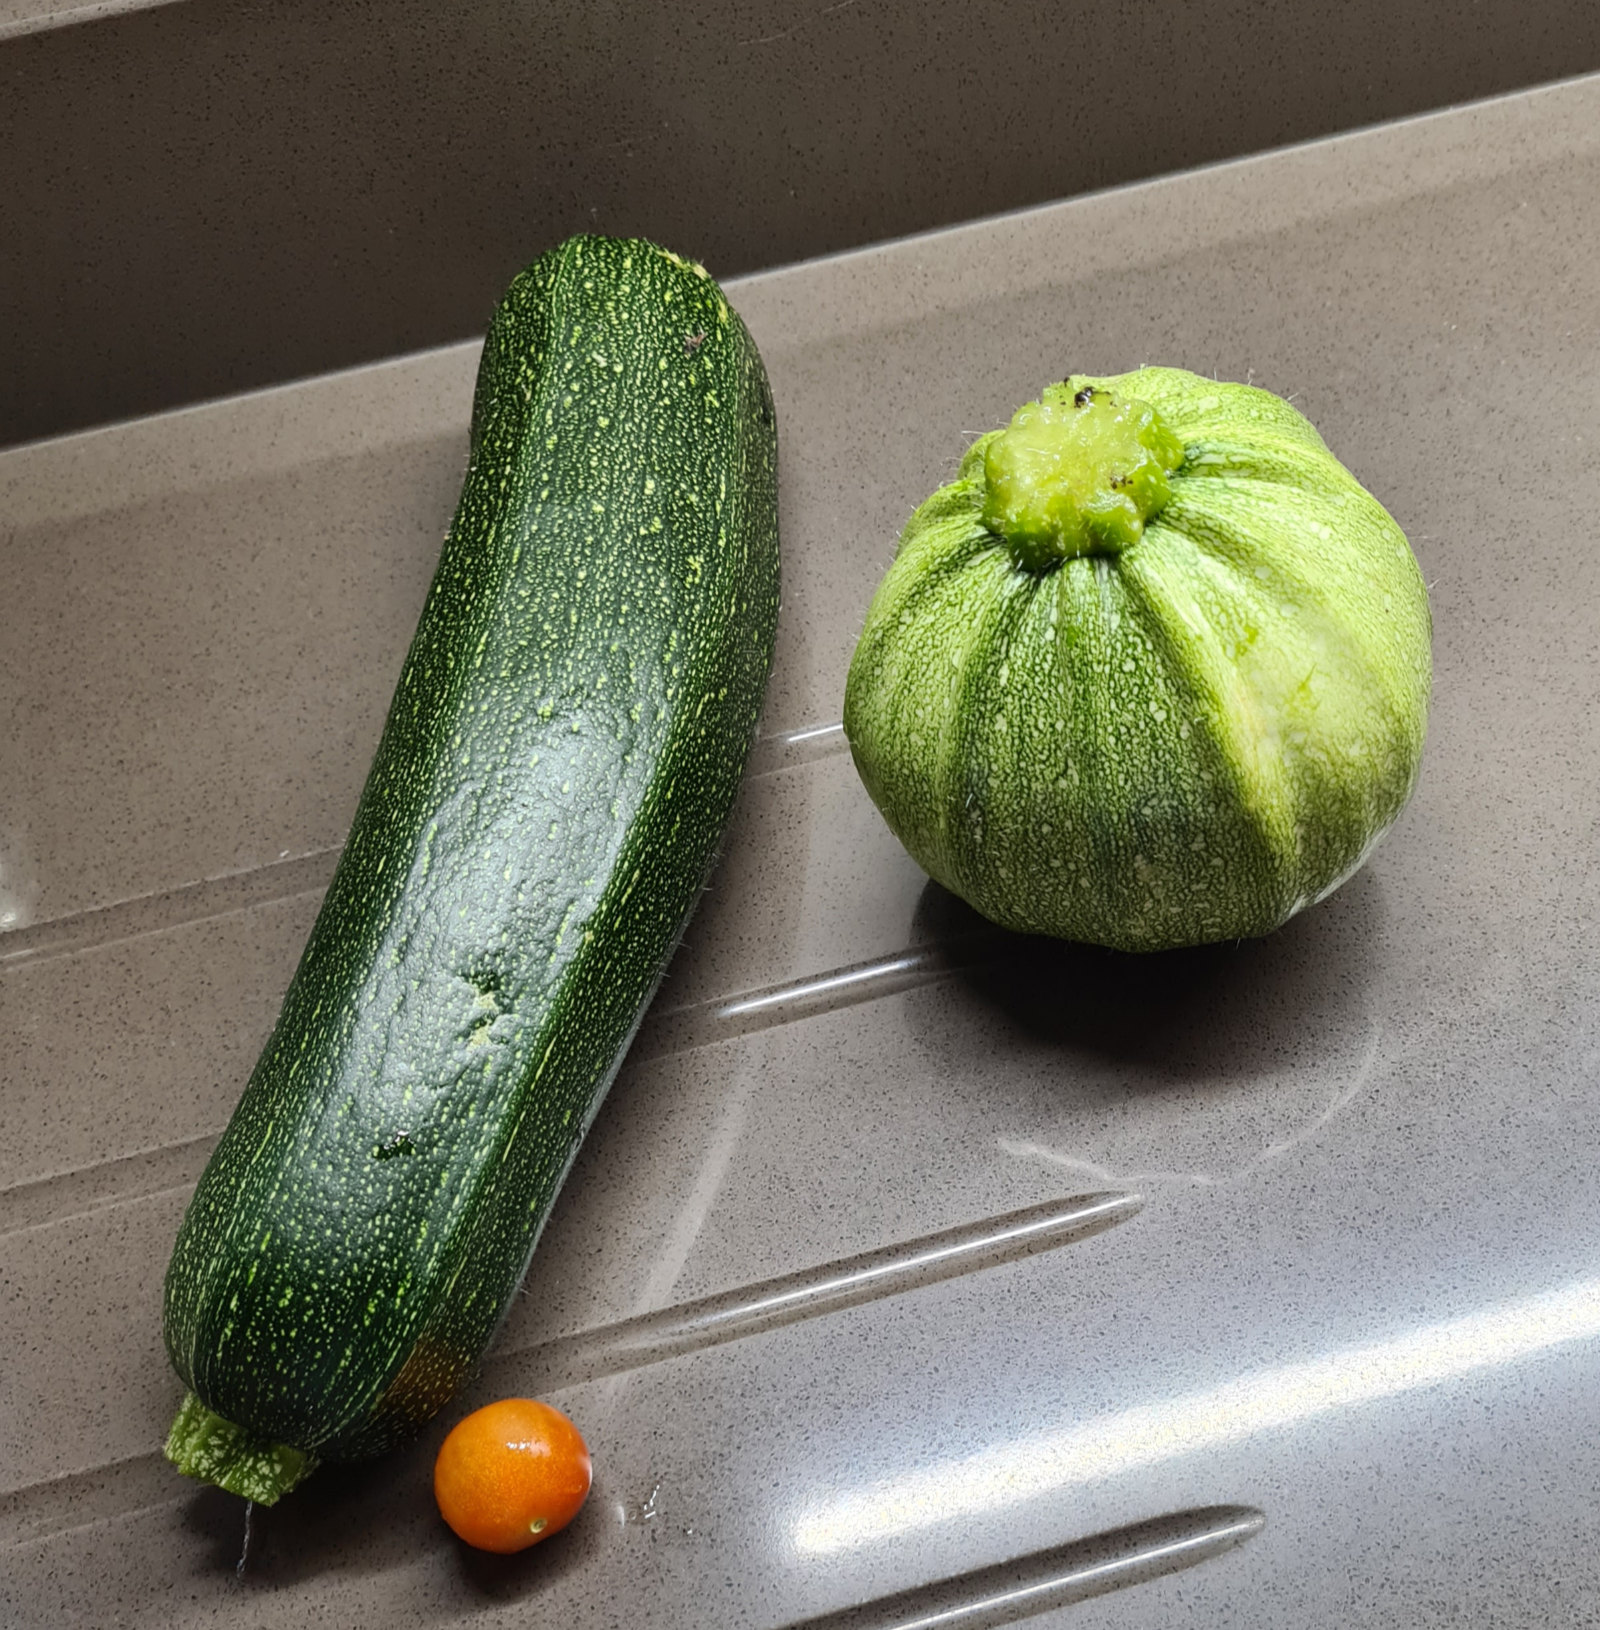 BIG courgettes!